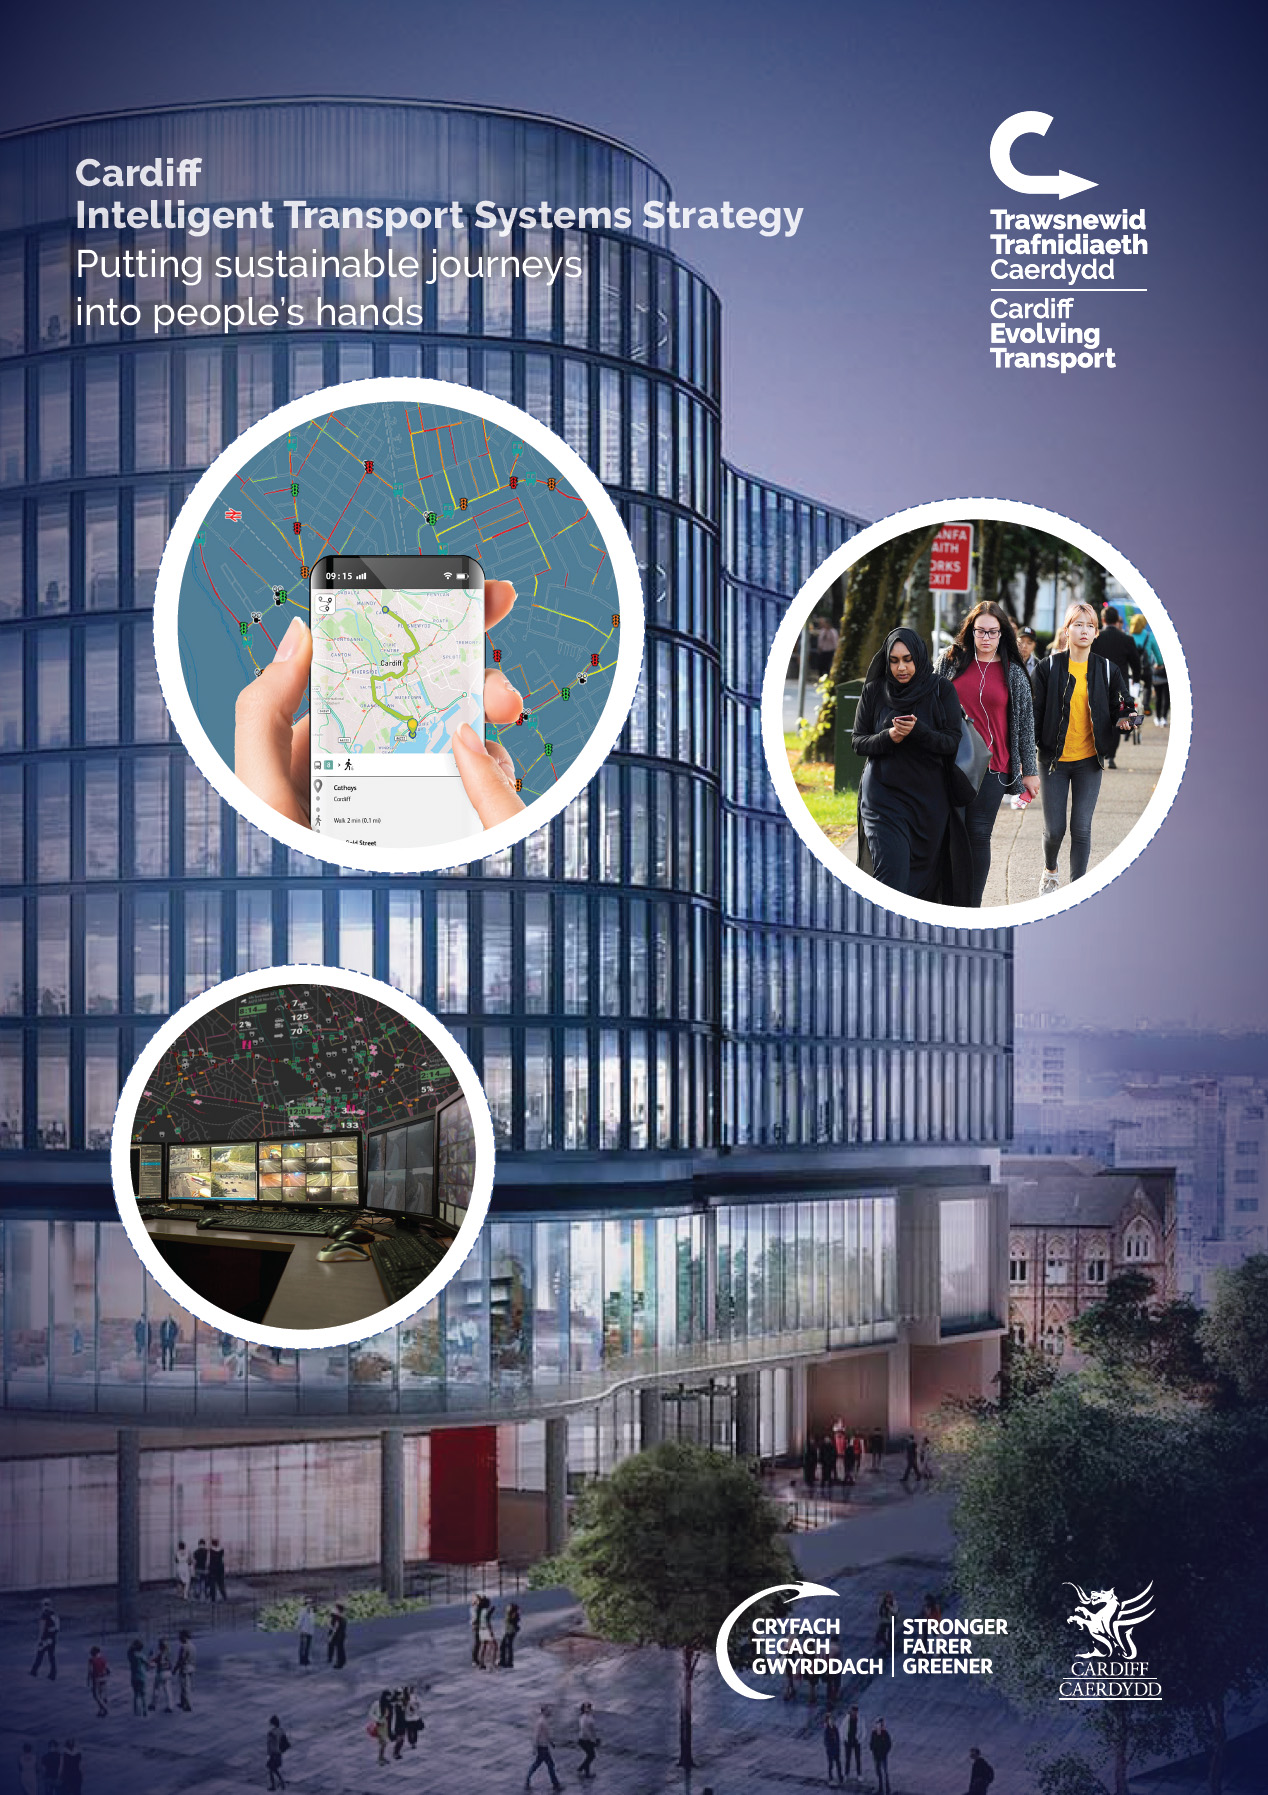 Background image of a cityscape with large office building fronted with glass, and people walking about on the pavement outside. Title text reads Cardiff Intelligent Transport Systems Strategy: putting sustainable journeys into people's hands. Cardiff council logos at top right and bottom right.